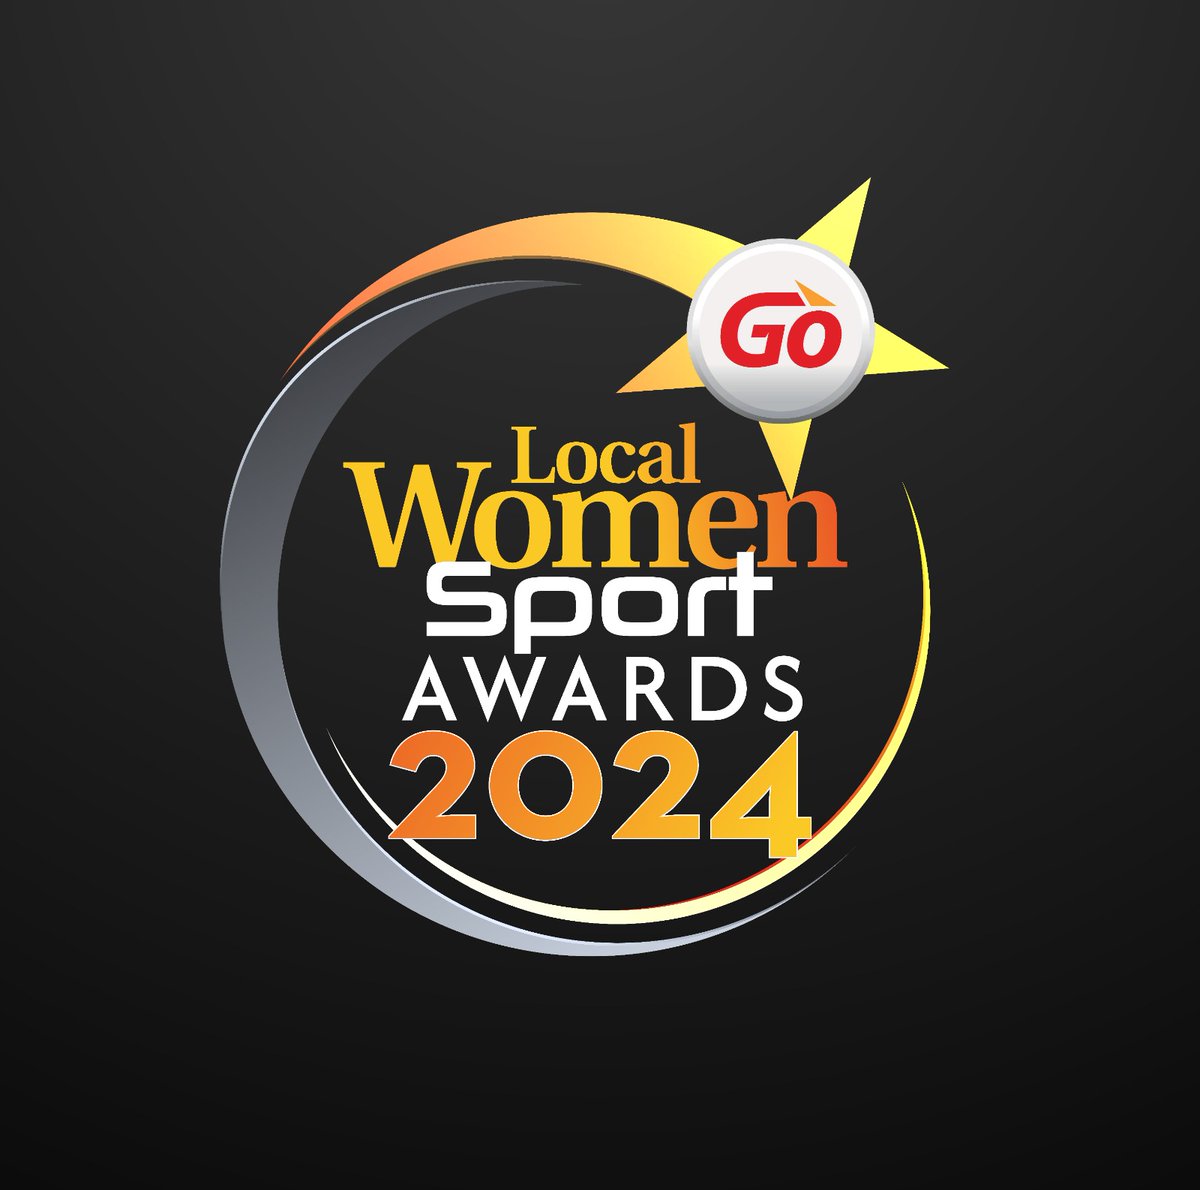 Nominations are now being sought for the 2024 Local Women Sport awards, recognising female sporting achievements at all levels. Enter here: localwomensport.com/local-women-sp…